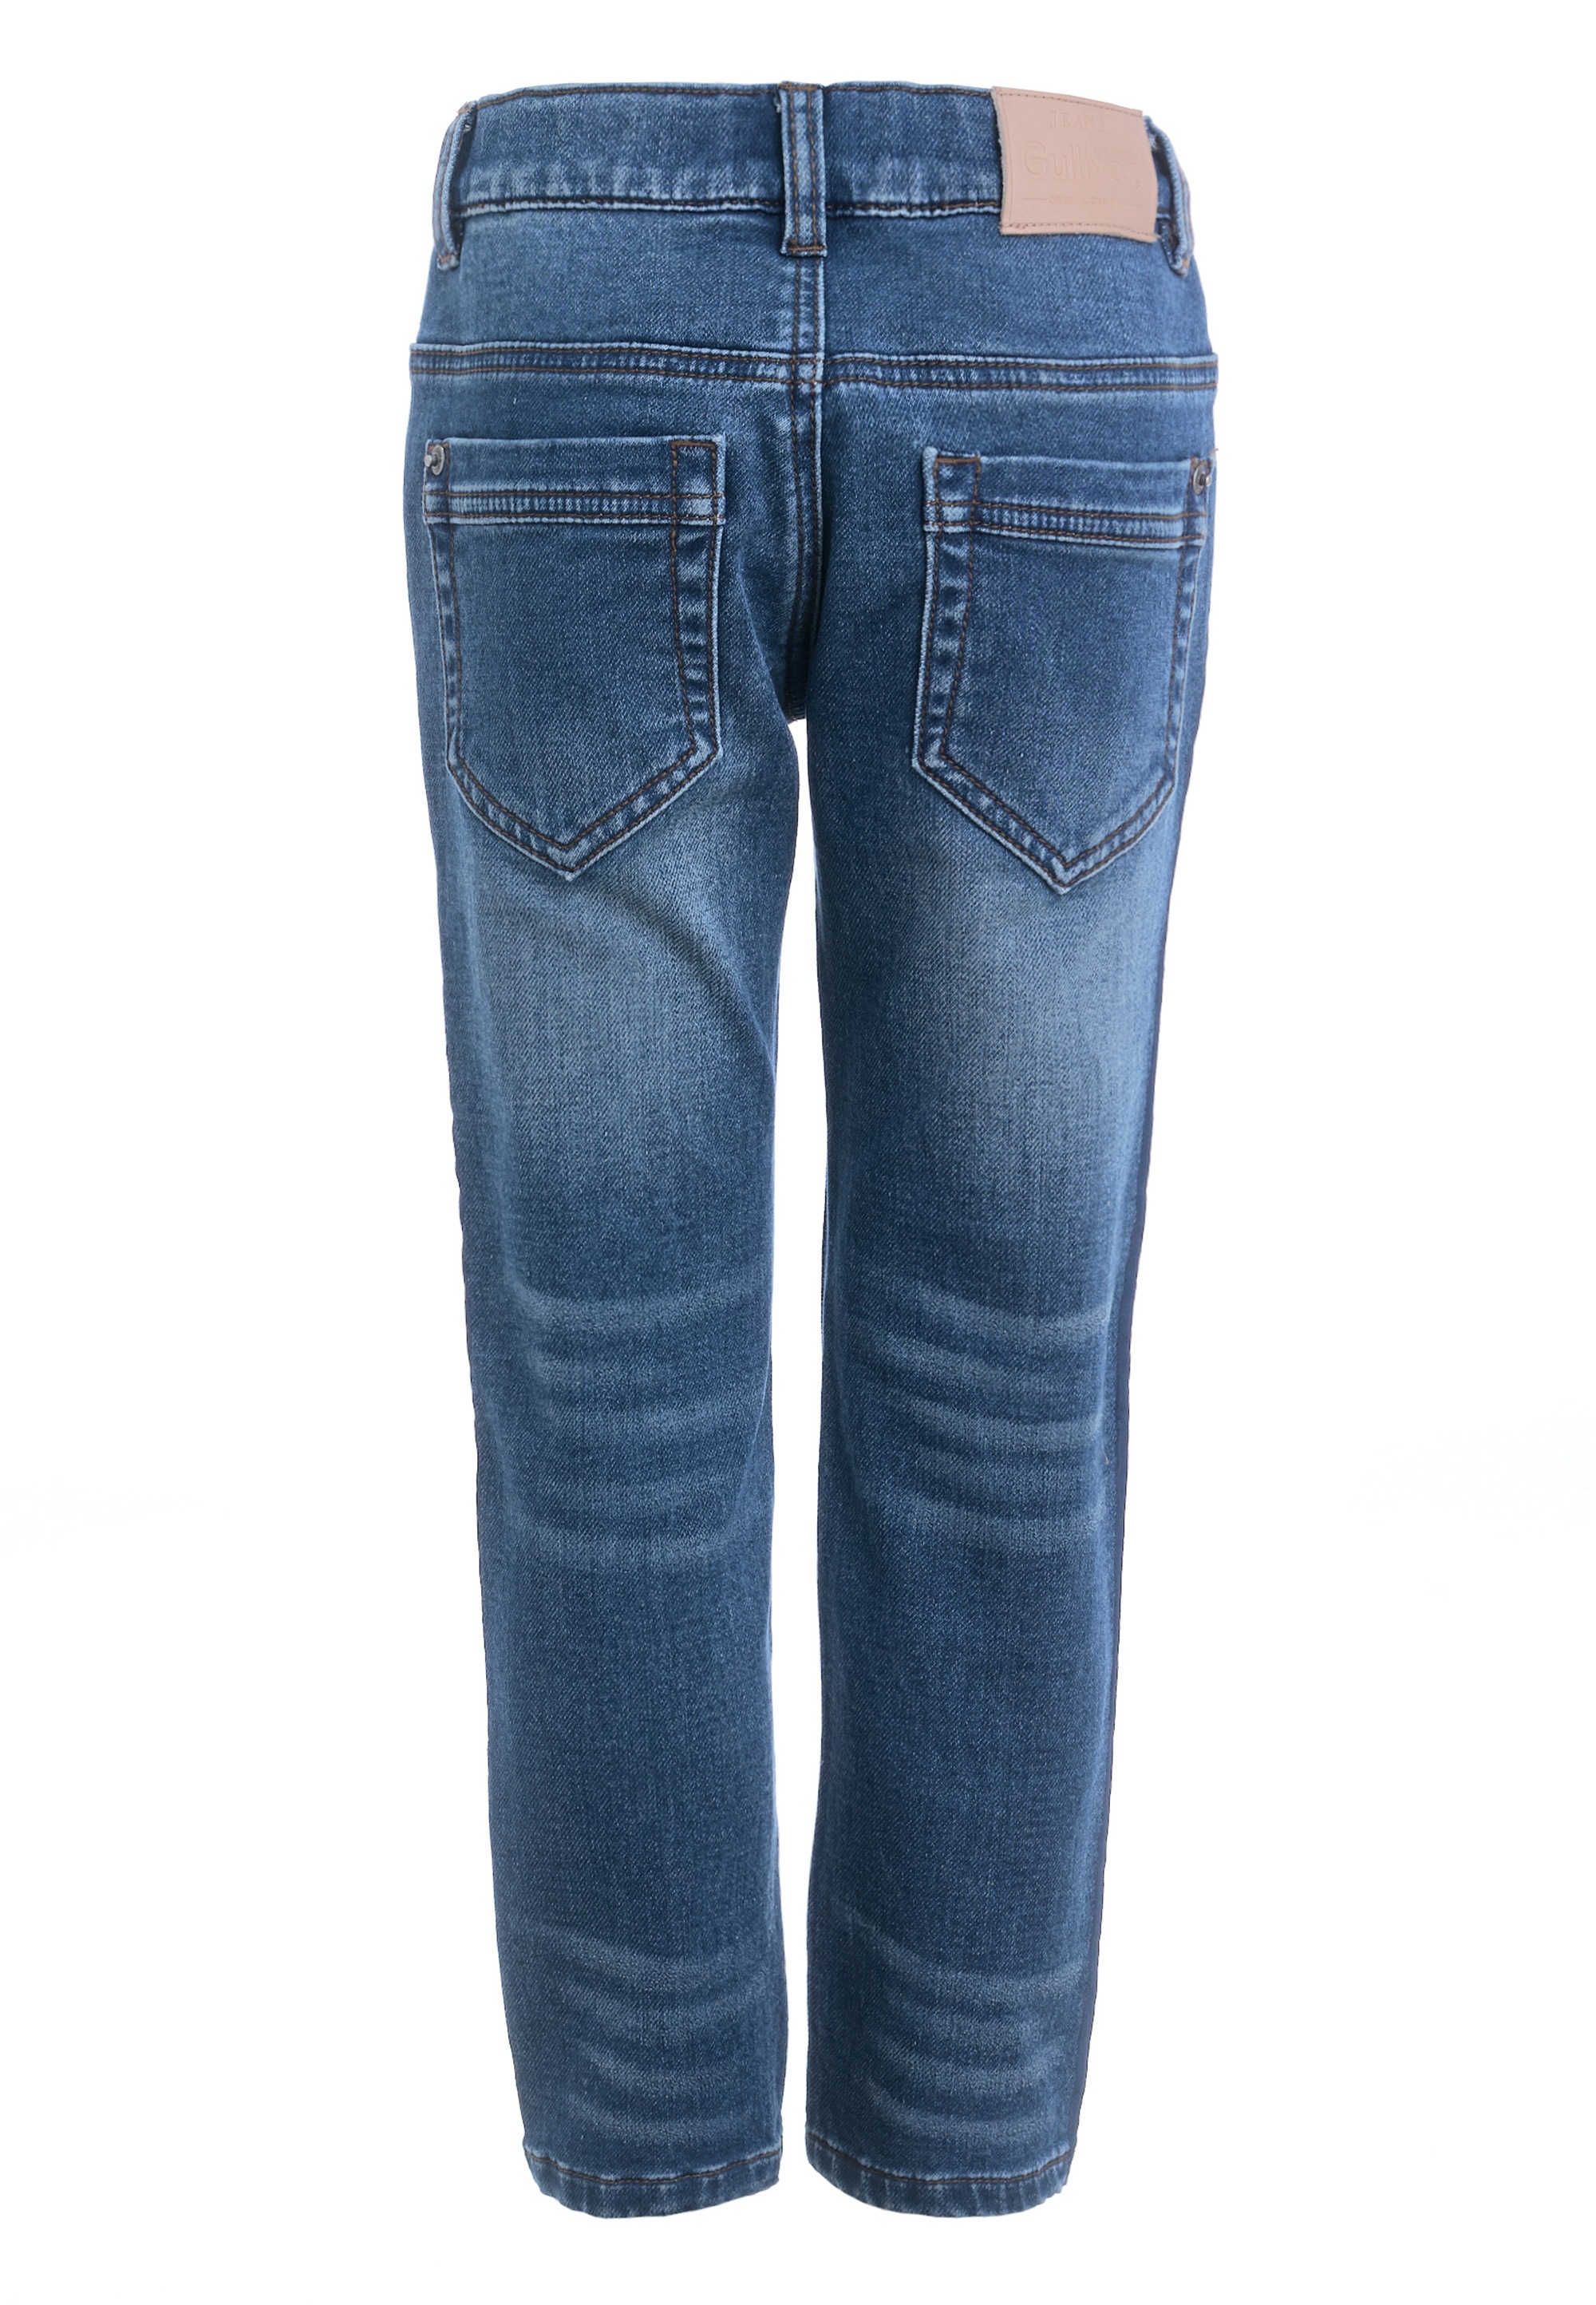 Gulliver Bequeme Jeans »Casual Denim Hose«, im Stone-Washed-Look